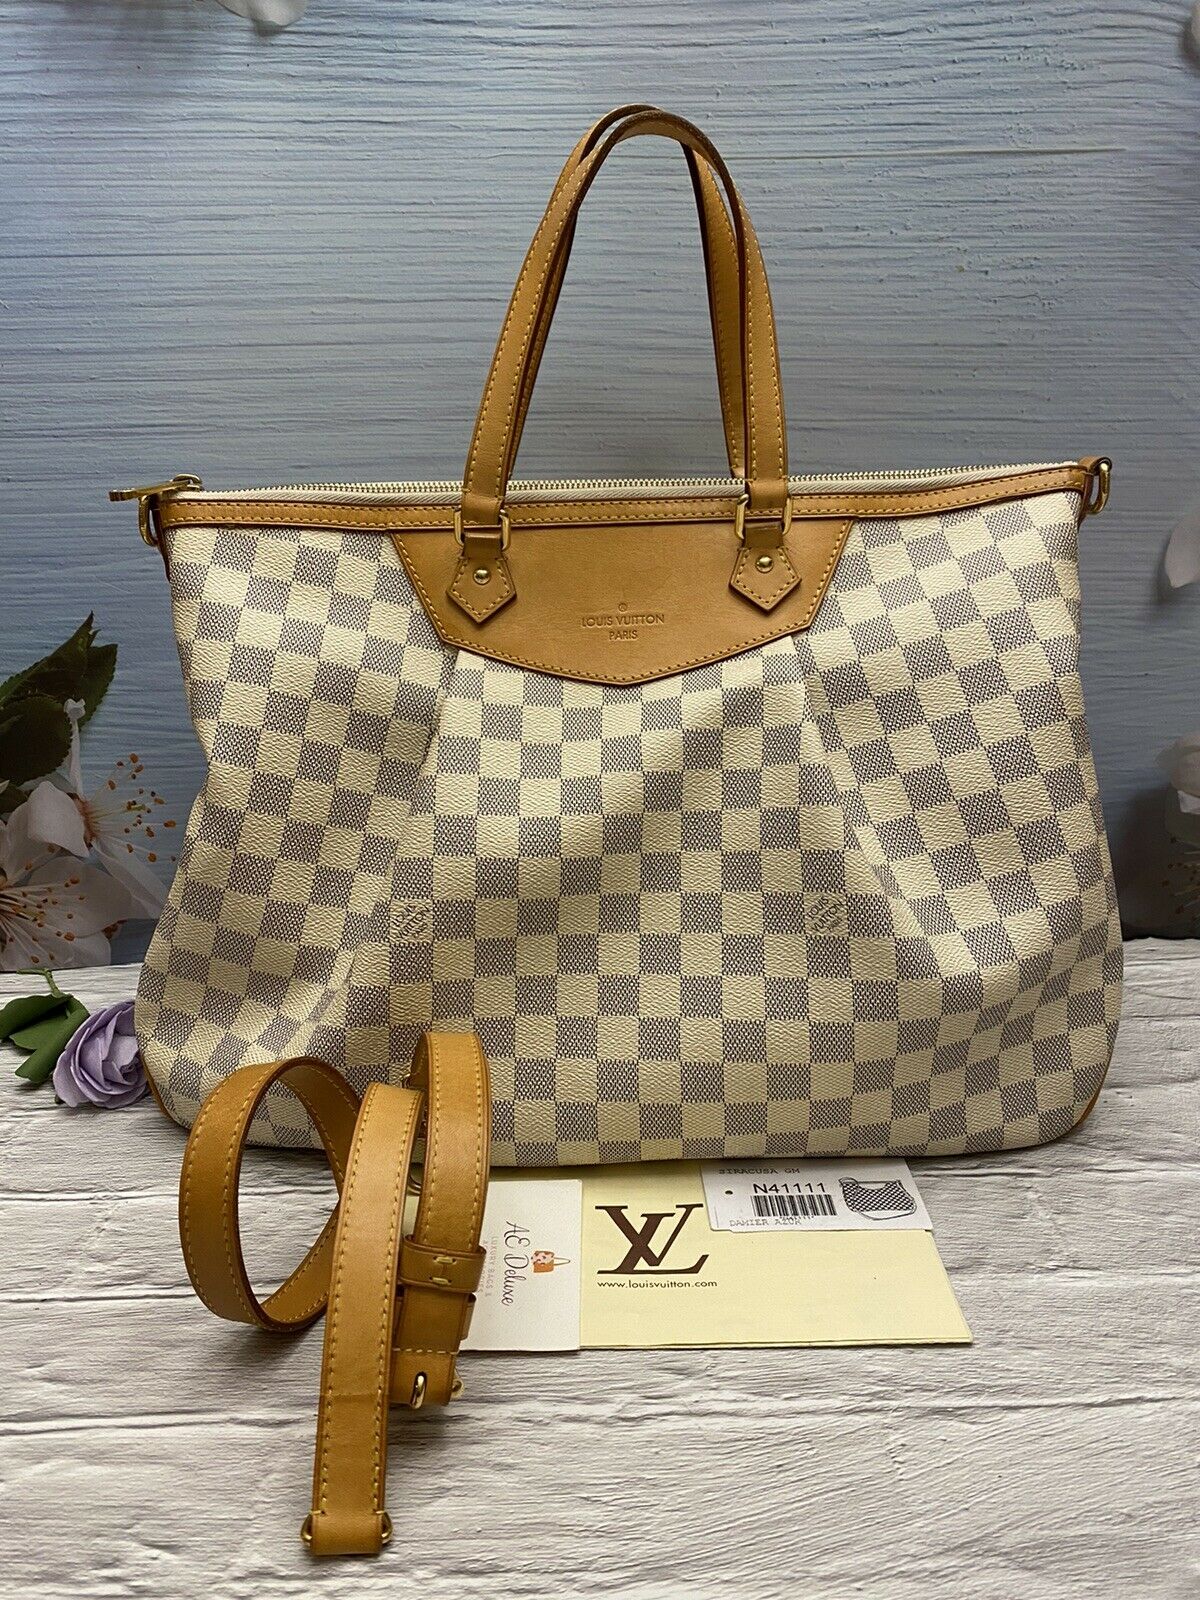 Louis Vuitton Siracusa GM Damier Azur *Authentic for Sale in Miami